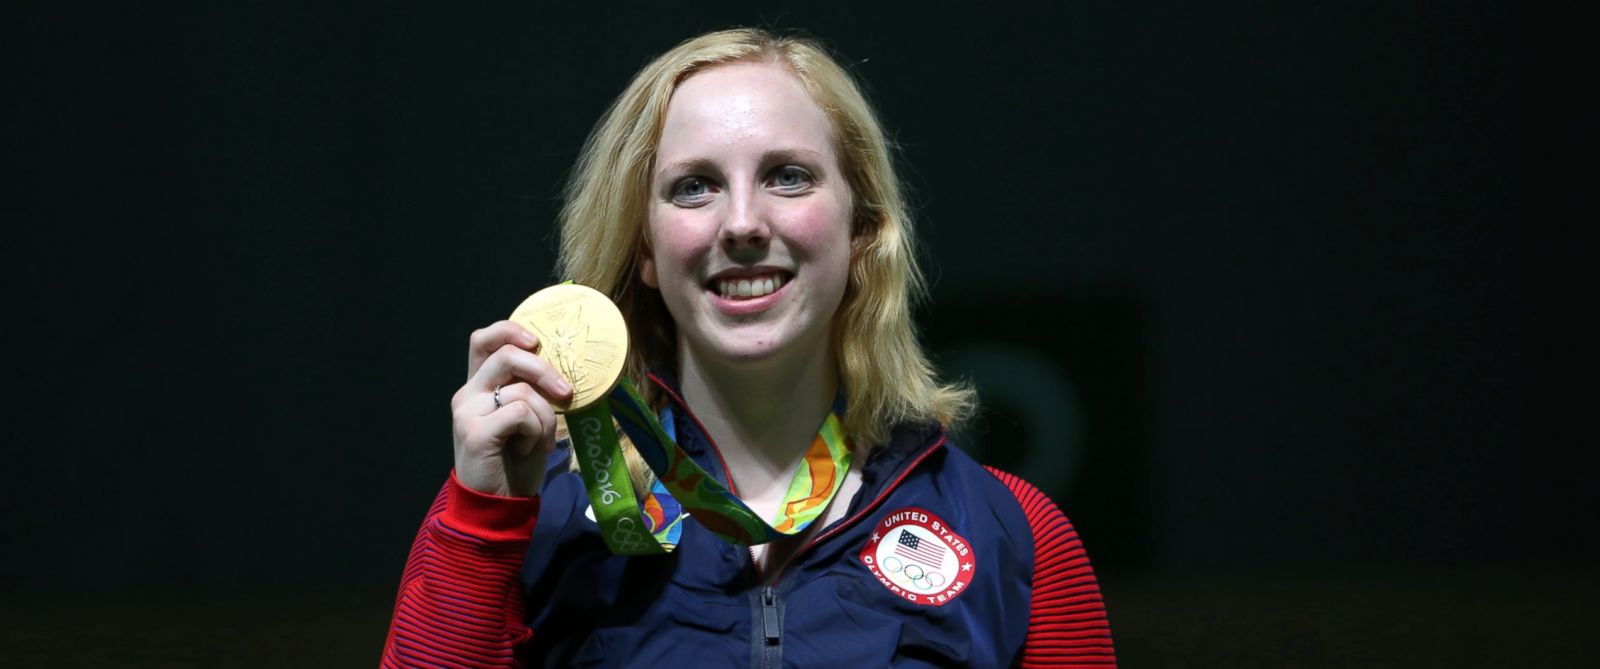 PHOTO: Virginia Thrasher of the United States poses with her gold medal in the Womens 10m Air Rifle event at Olympic Shooting Center during the 2016 Summer Olympics in Rio de Janeiro, Aug. 6, 2016.